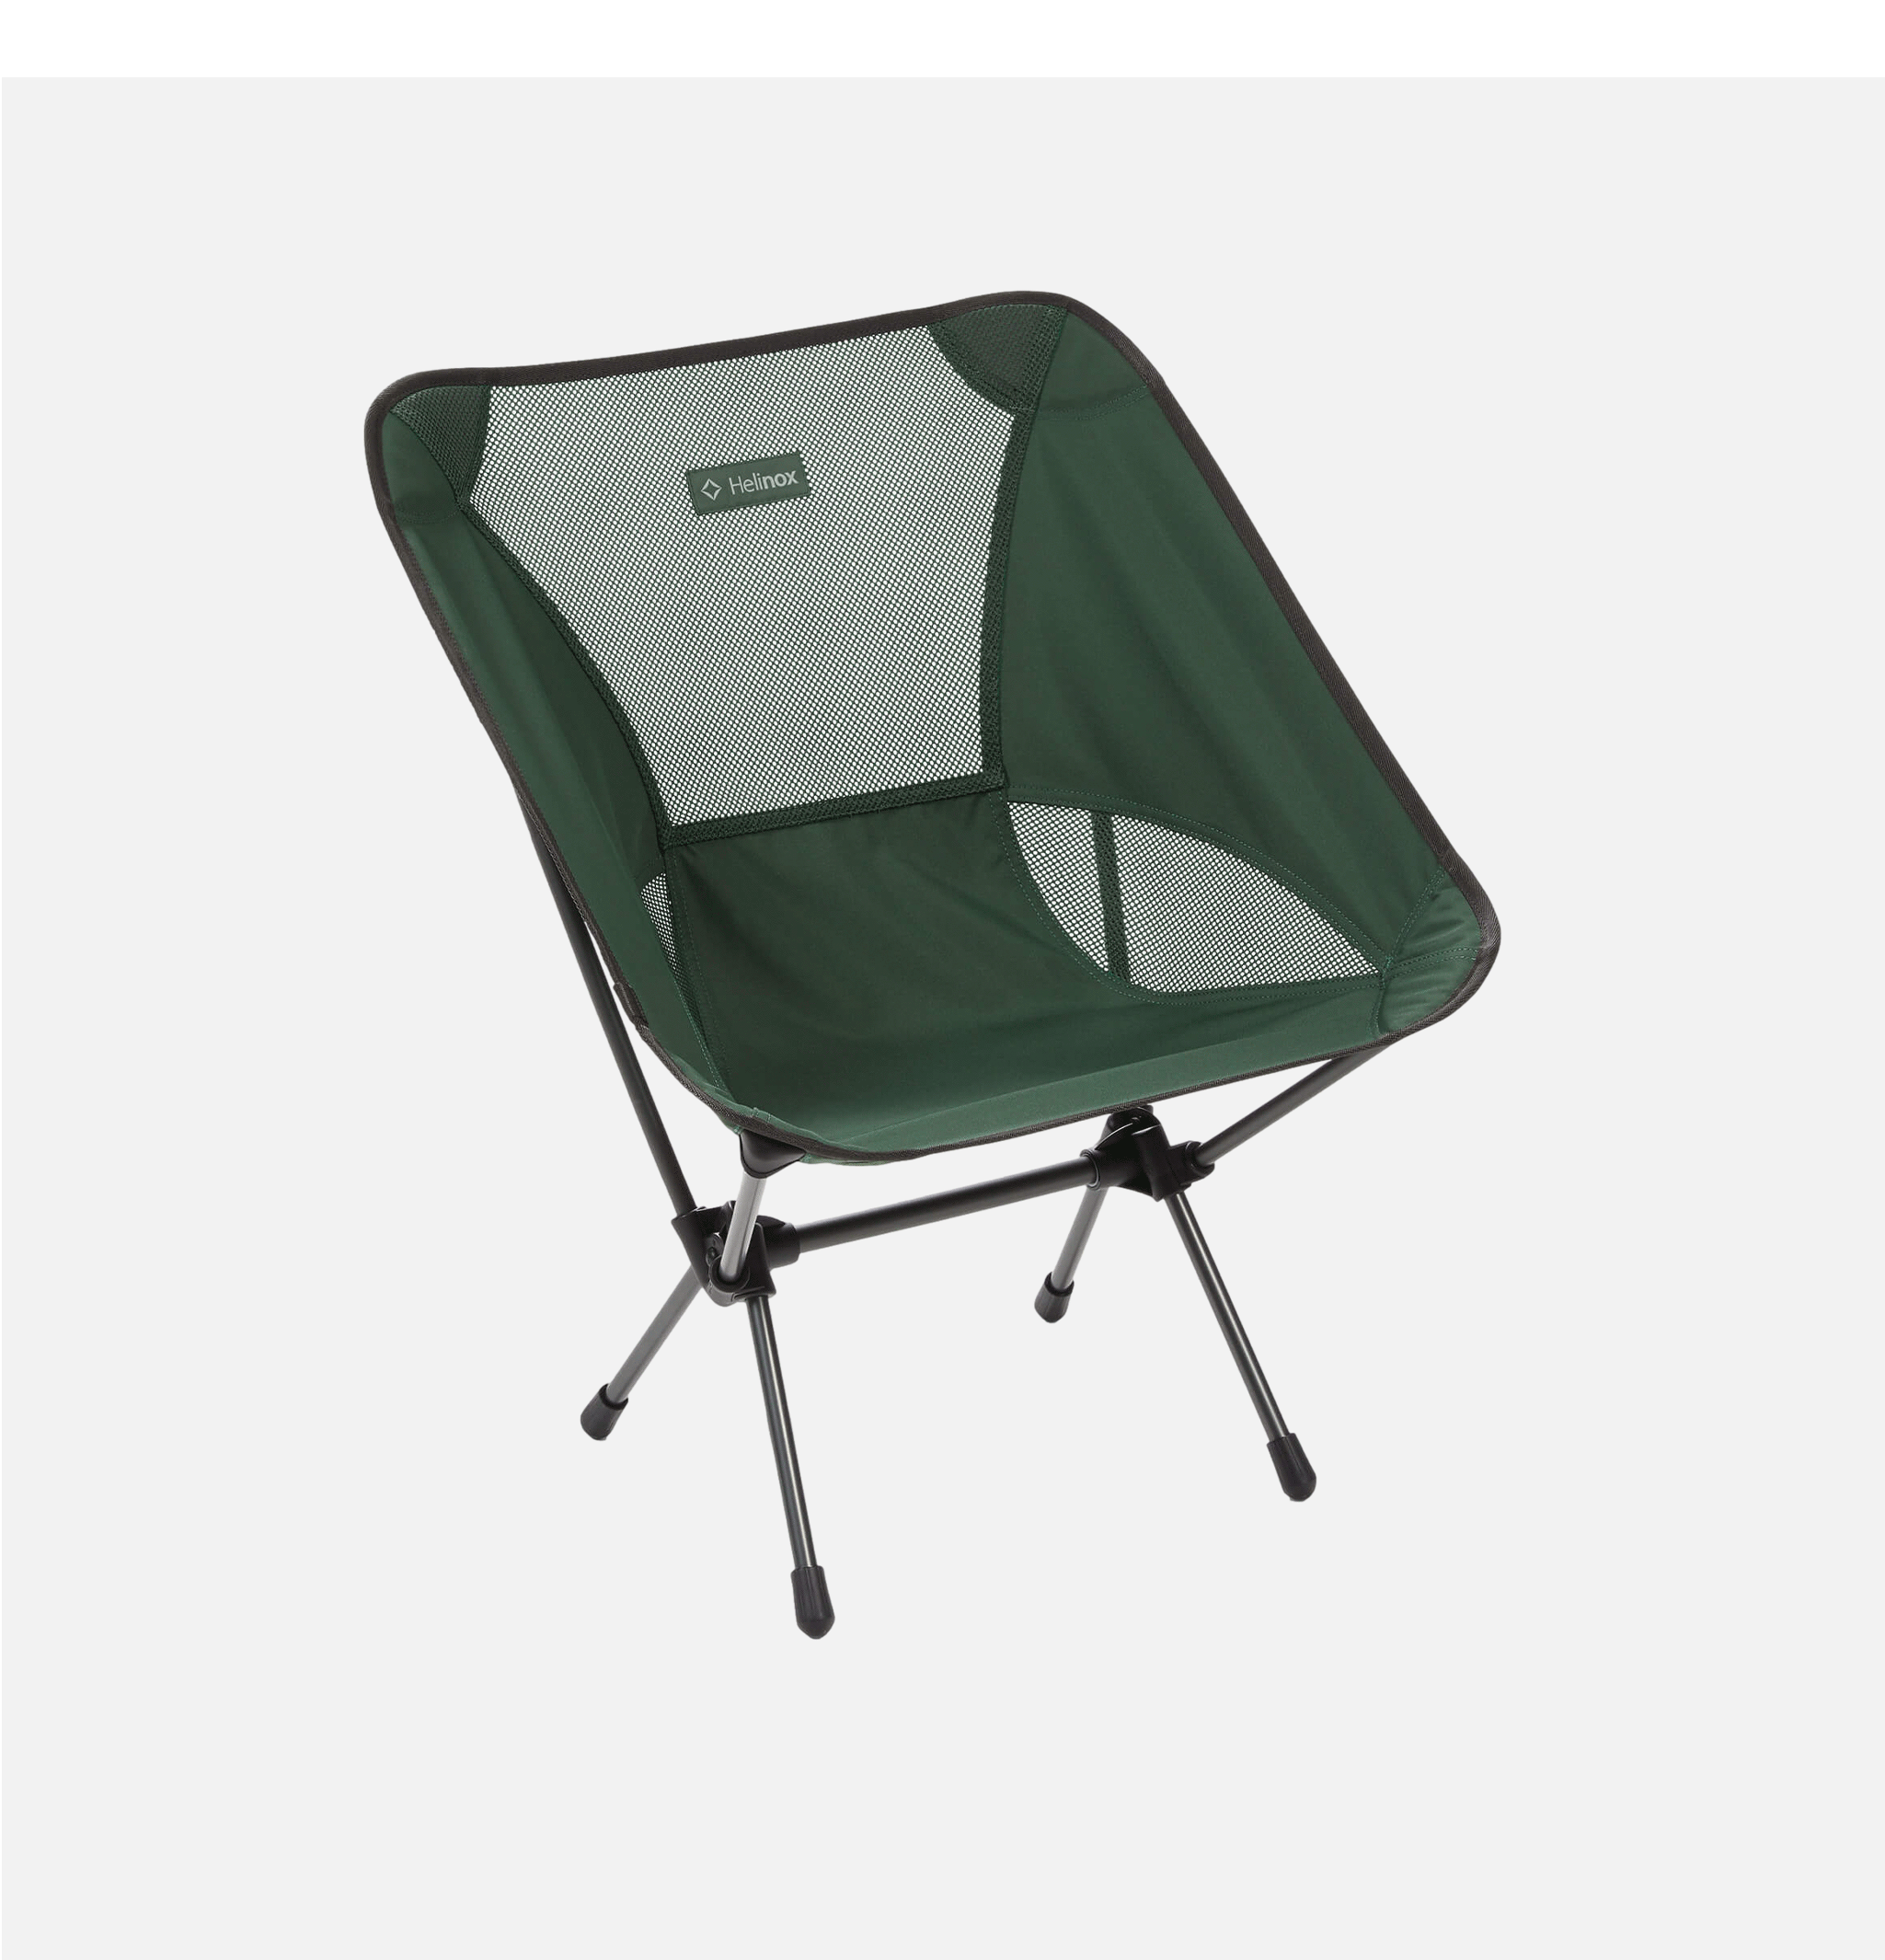 Chair One Forest Green Helinox